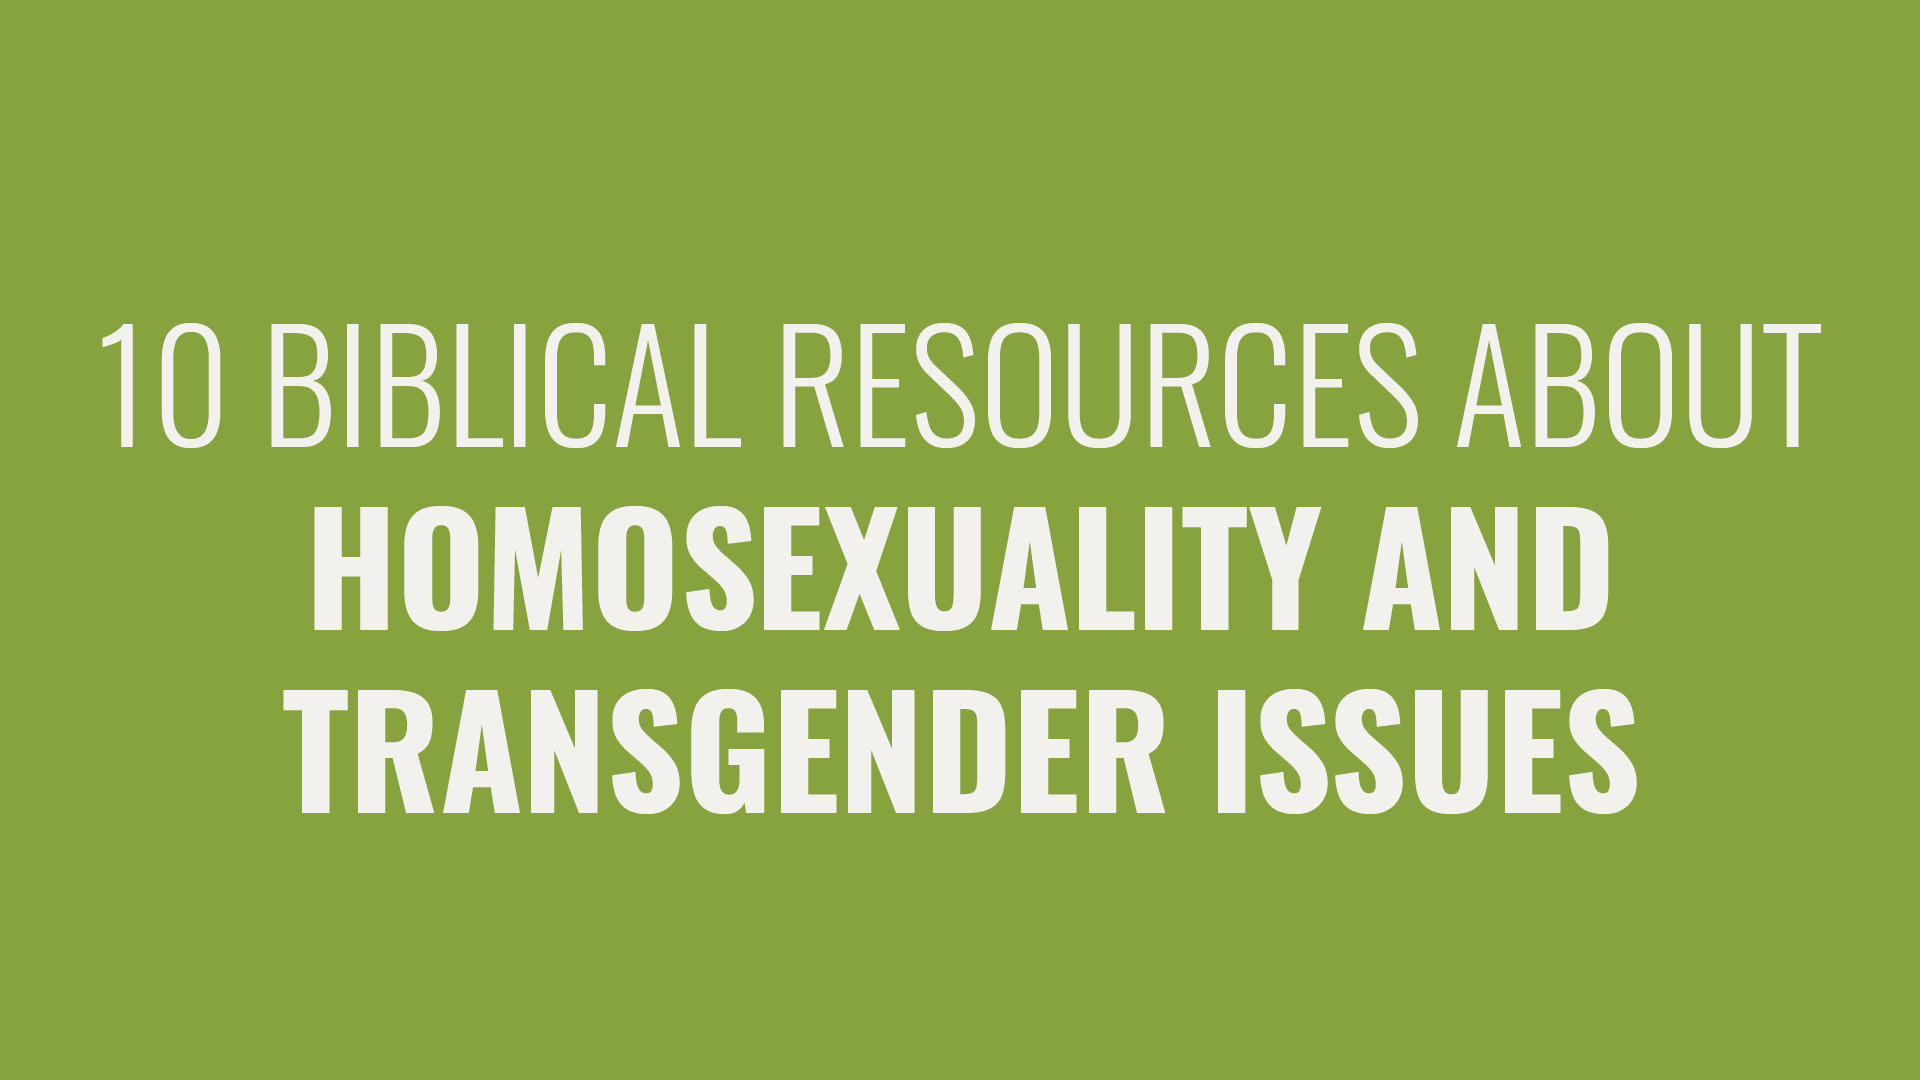 10 Resources to Help You Talk About Homosexuality and Transgender Issues Biblically Hero Image